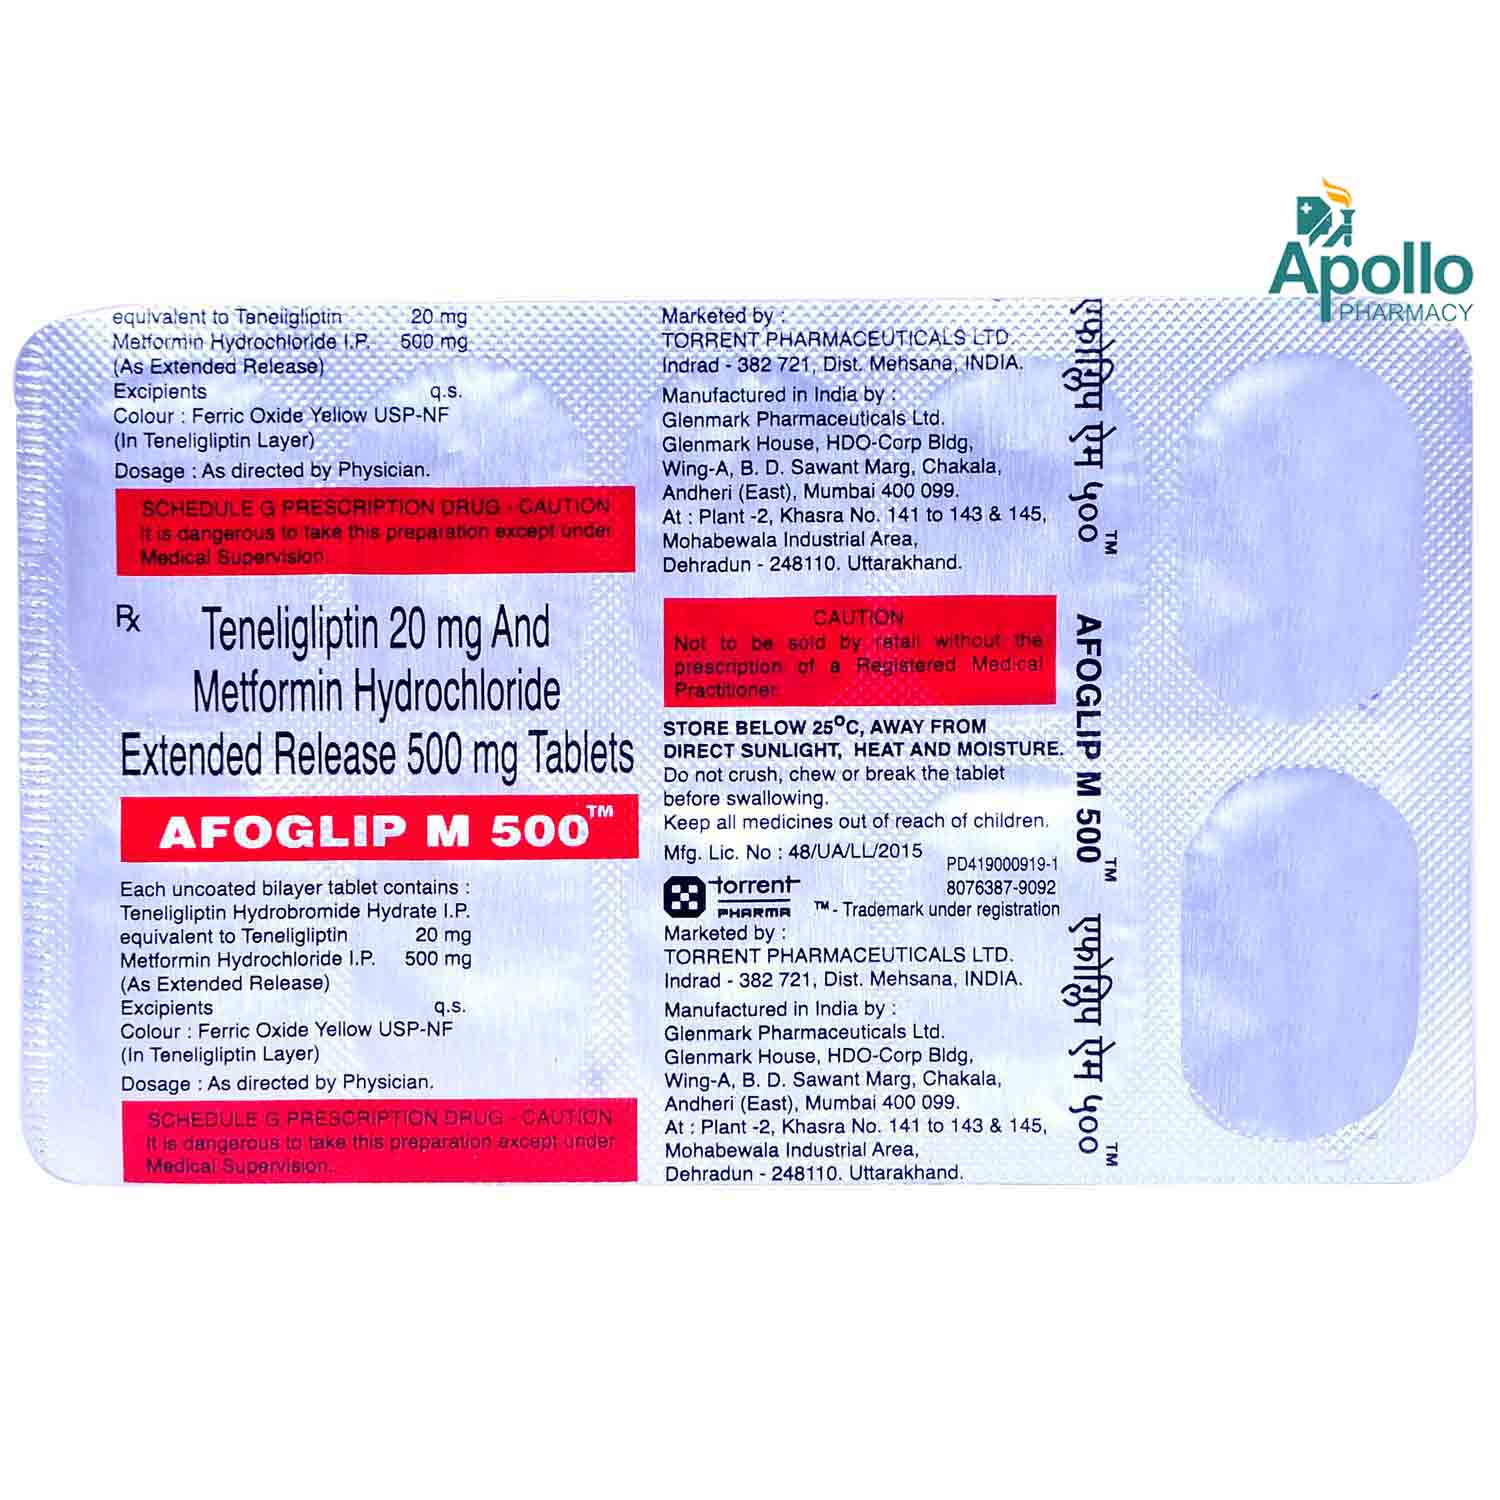 Afoglip M 500 Tablet 10 S Price Uses Side Effects Composition Apollo Pharmacy